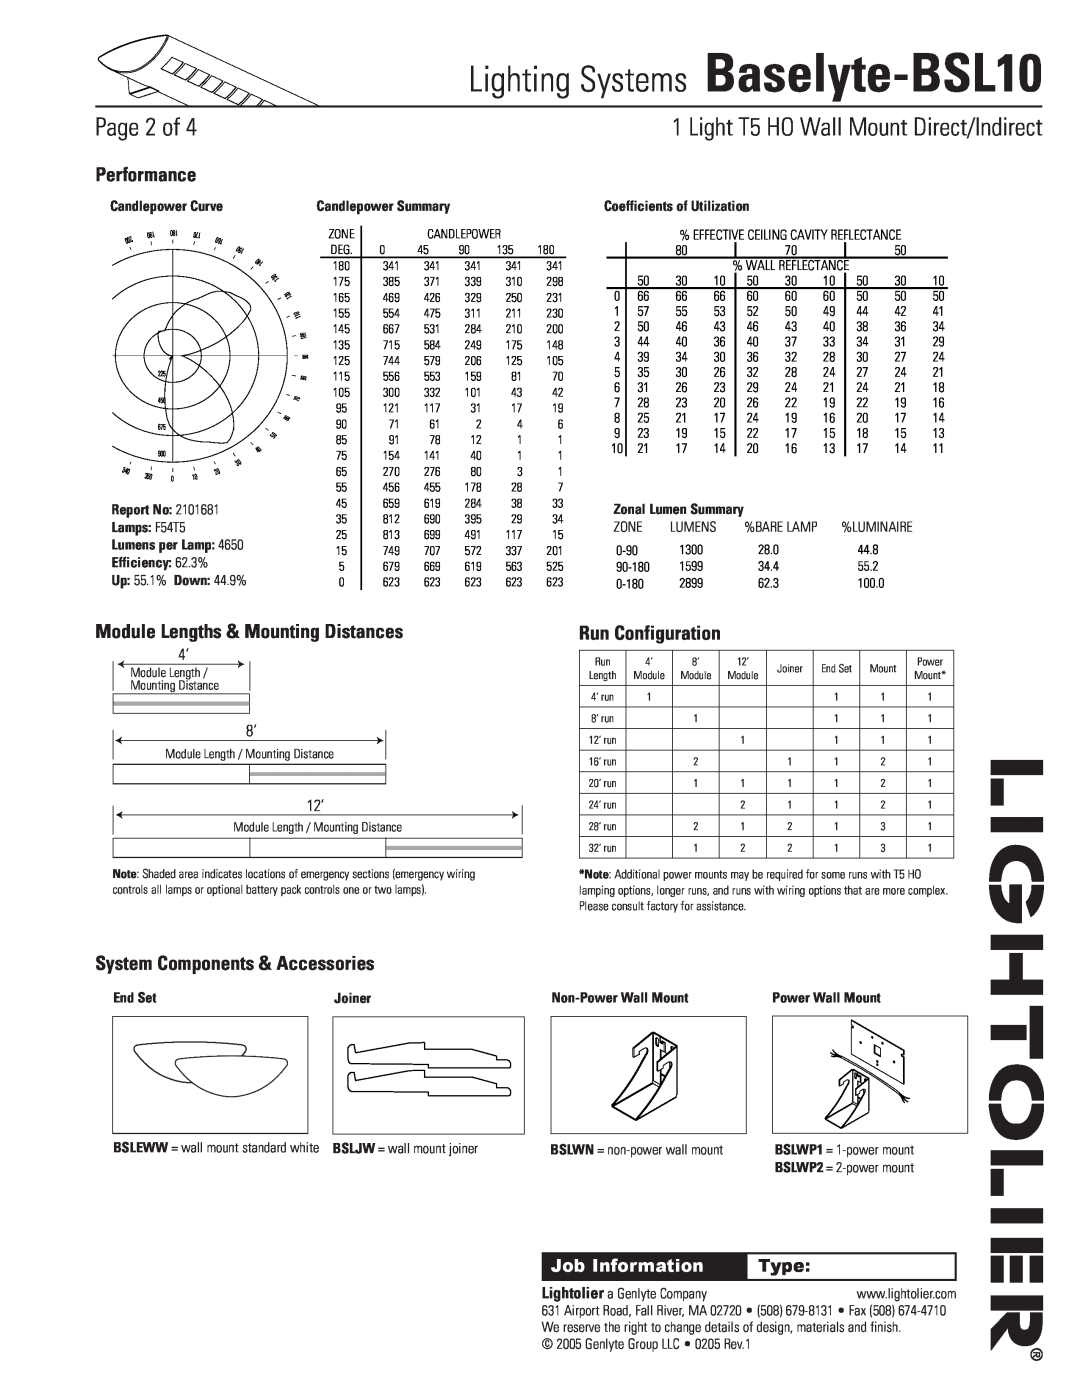 Lightolier Baselyte-BSL10 Module Lengths & Mounting Distances, Run Configuration, System Components & Accessories, Type 